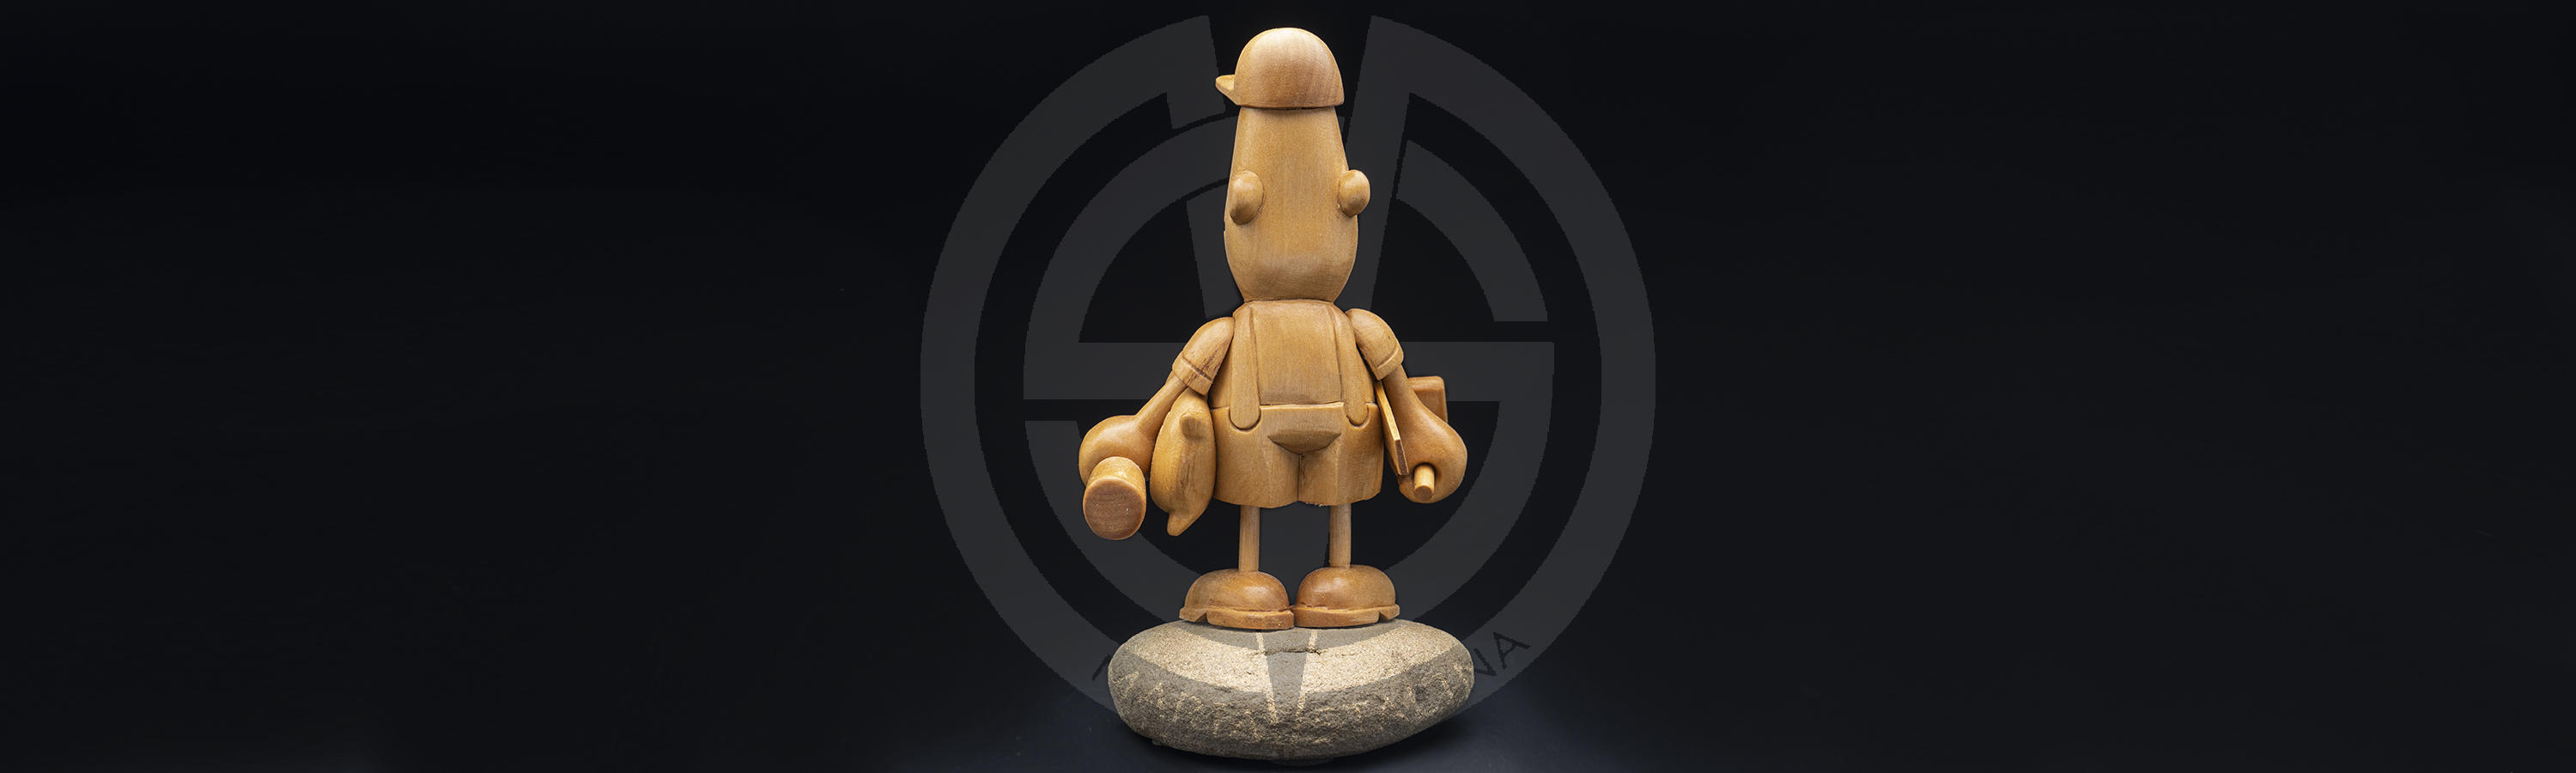 Wooden statuette from Bulgaria